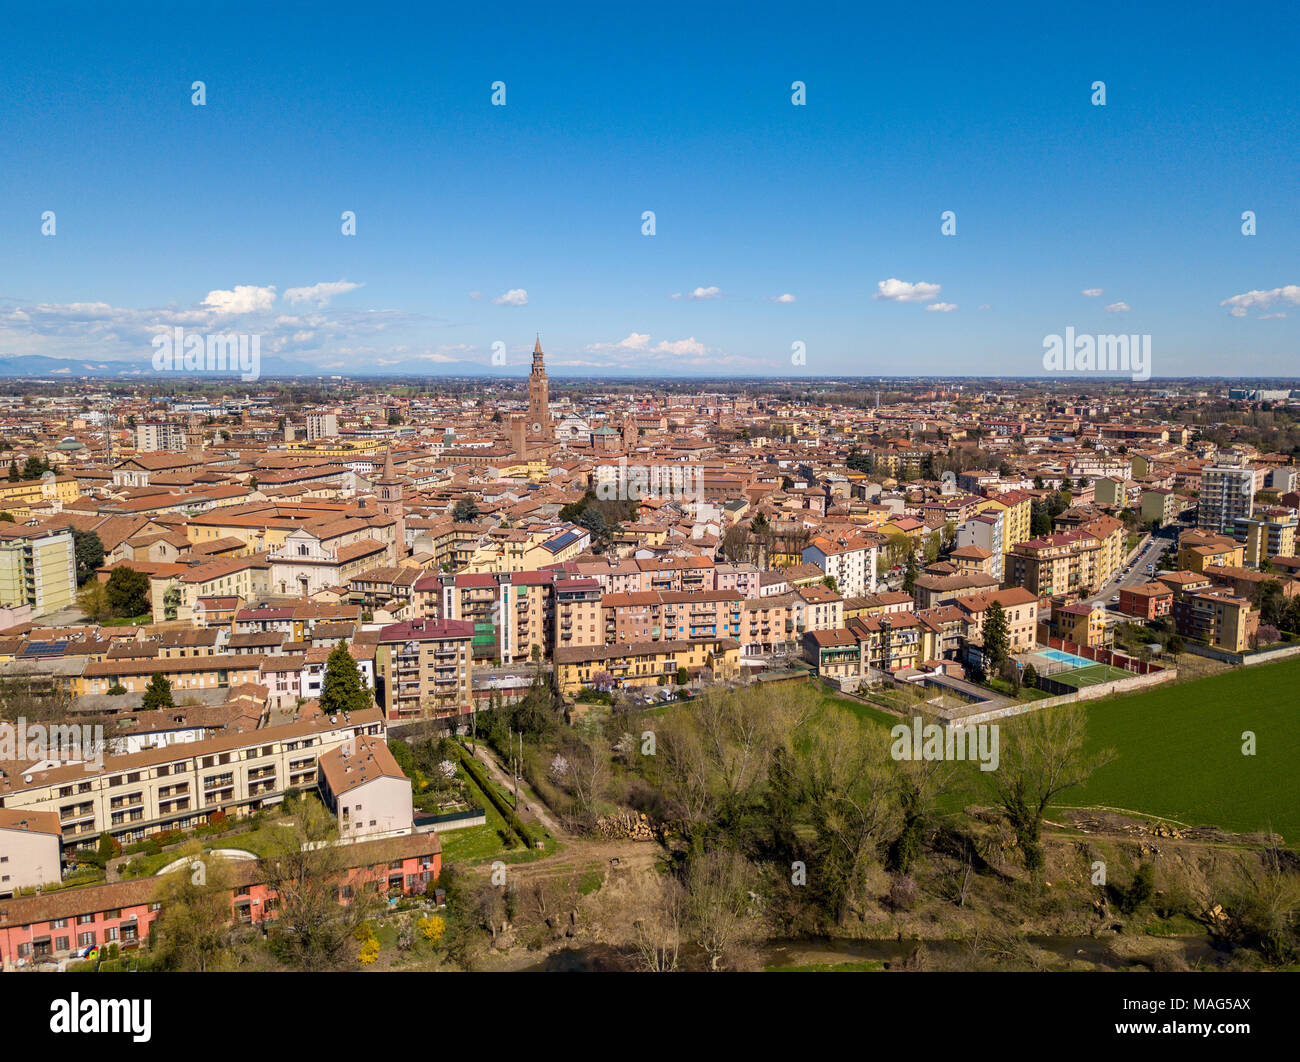 Aerial view of the city of Cremona, Lombardy, Italy. Cathedral and Torrazzo of Cremona, the tallest bell tower in Italy 112 meters high Stock Photo